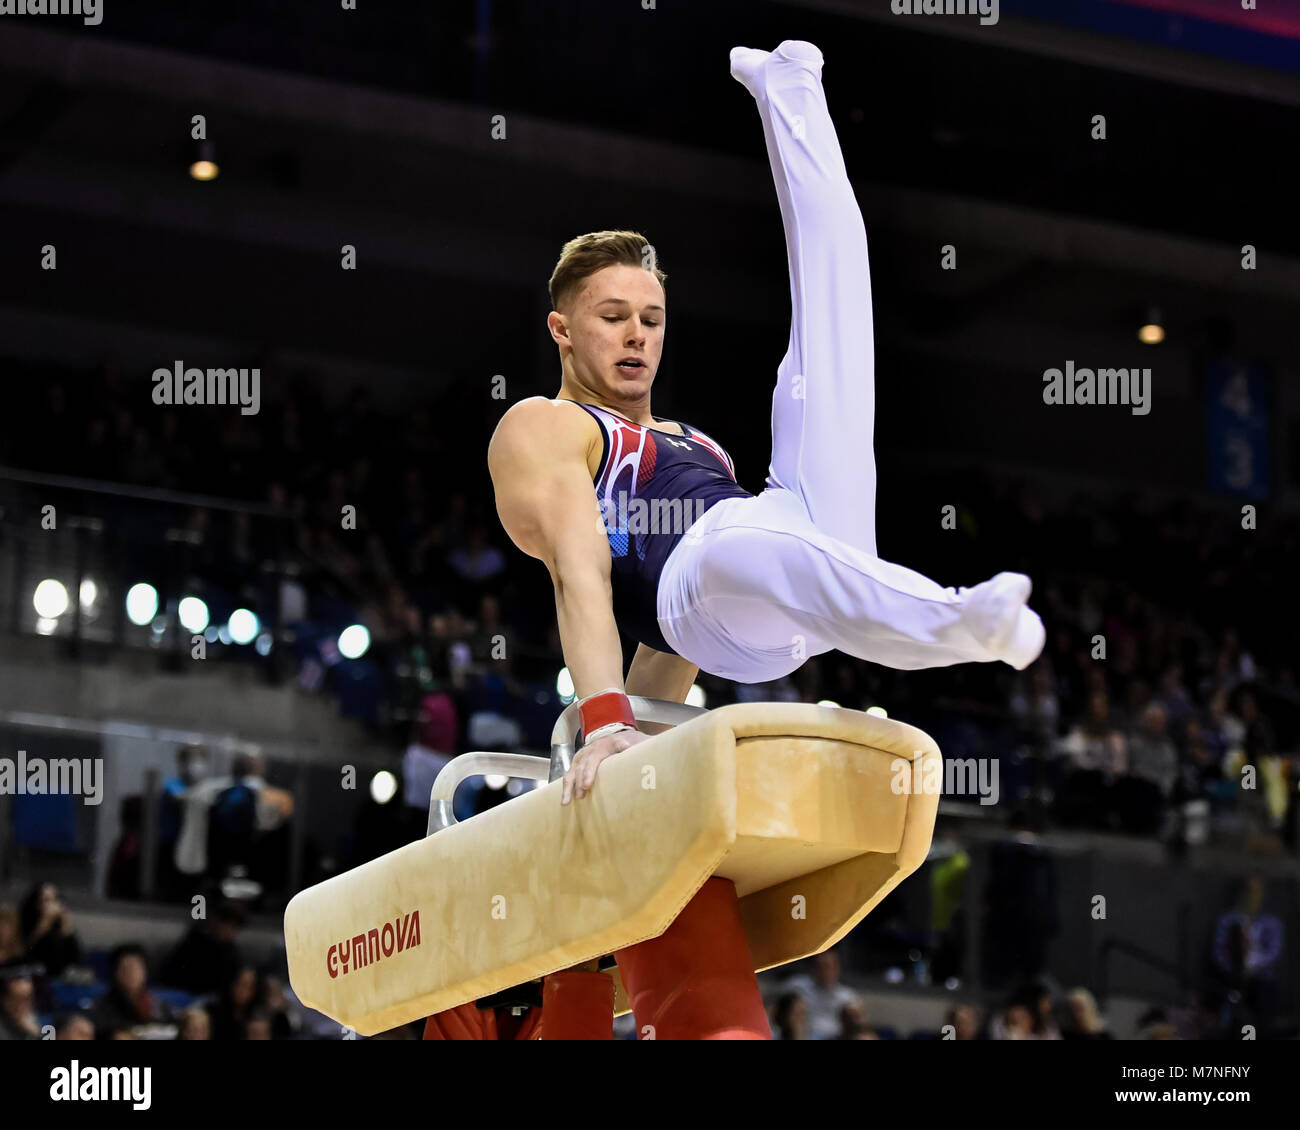 Echo Arena, Liverpool, UK. 11th Mar, 2018. Brinn Bevan competes on the Pommel Horse during the WAG Senior Apparatus Final/MAG Masters of the 2018 Gymnastics British Championships at Echo Arena on Sunday, 11 March 2018. LIVERPOOL ENGLAND. Credit: Taka G Wu Credit: Taka Wu/Alamy Live News Stock Photo